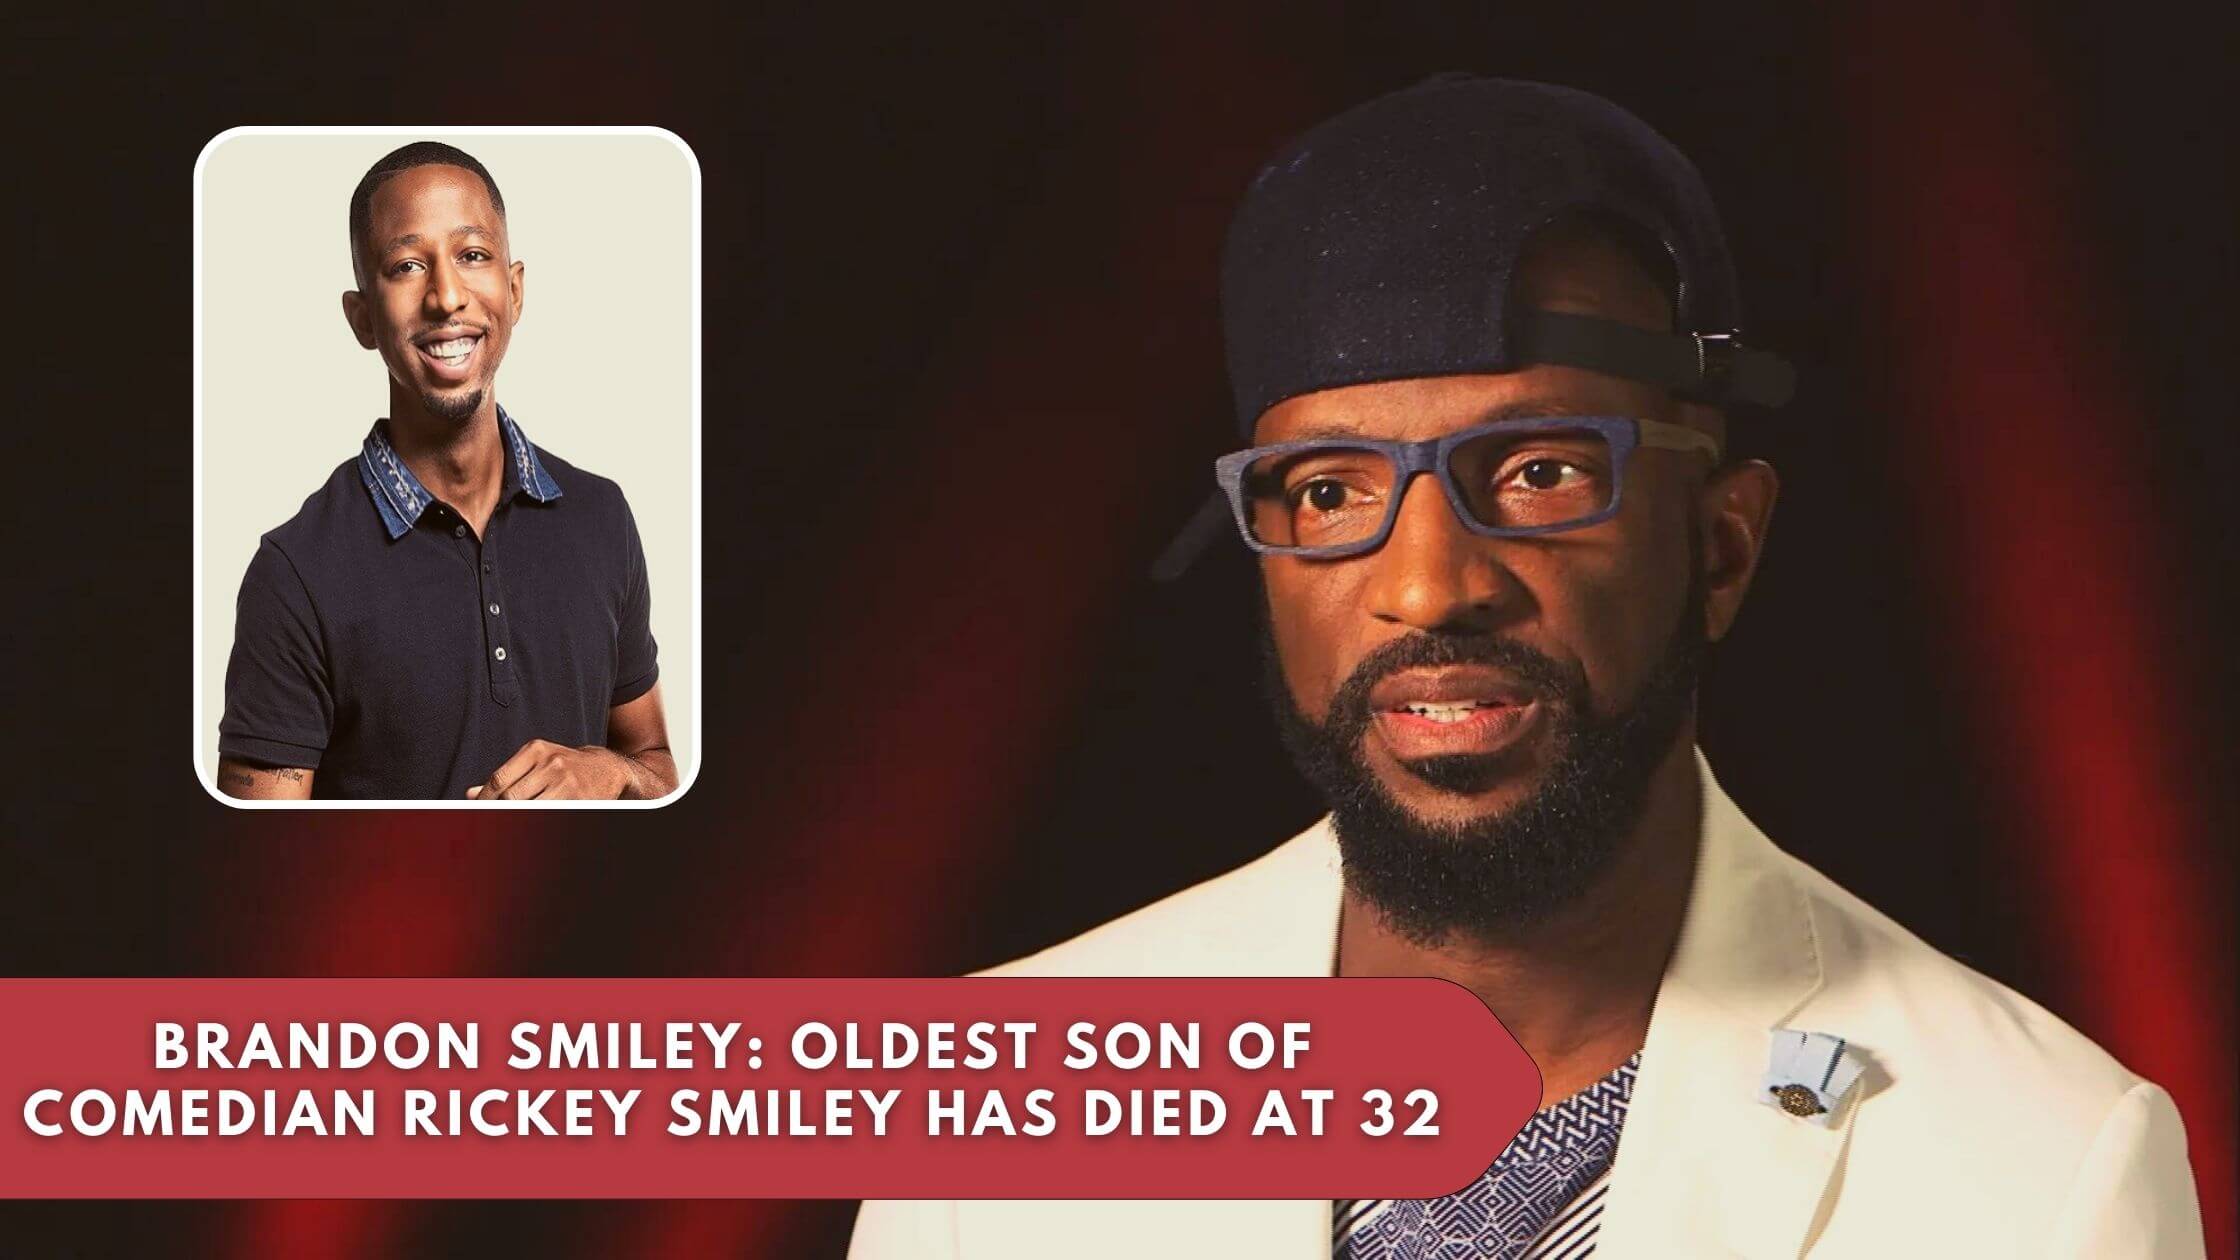 Brandon Smiley’s Death Oldest Son Of Comedian Rickey Smiley Has Died At 32